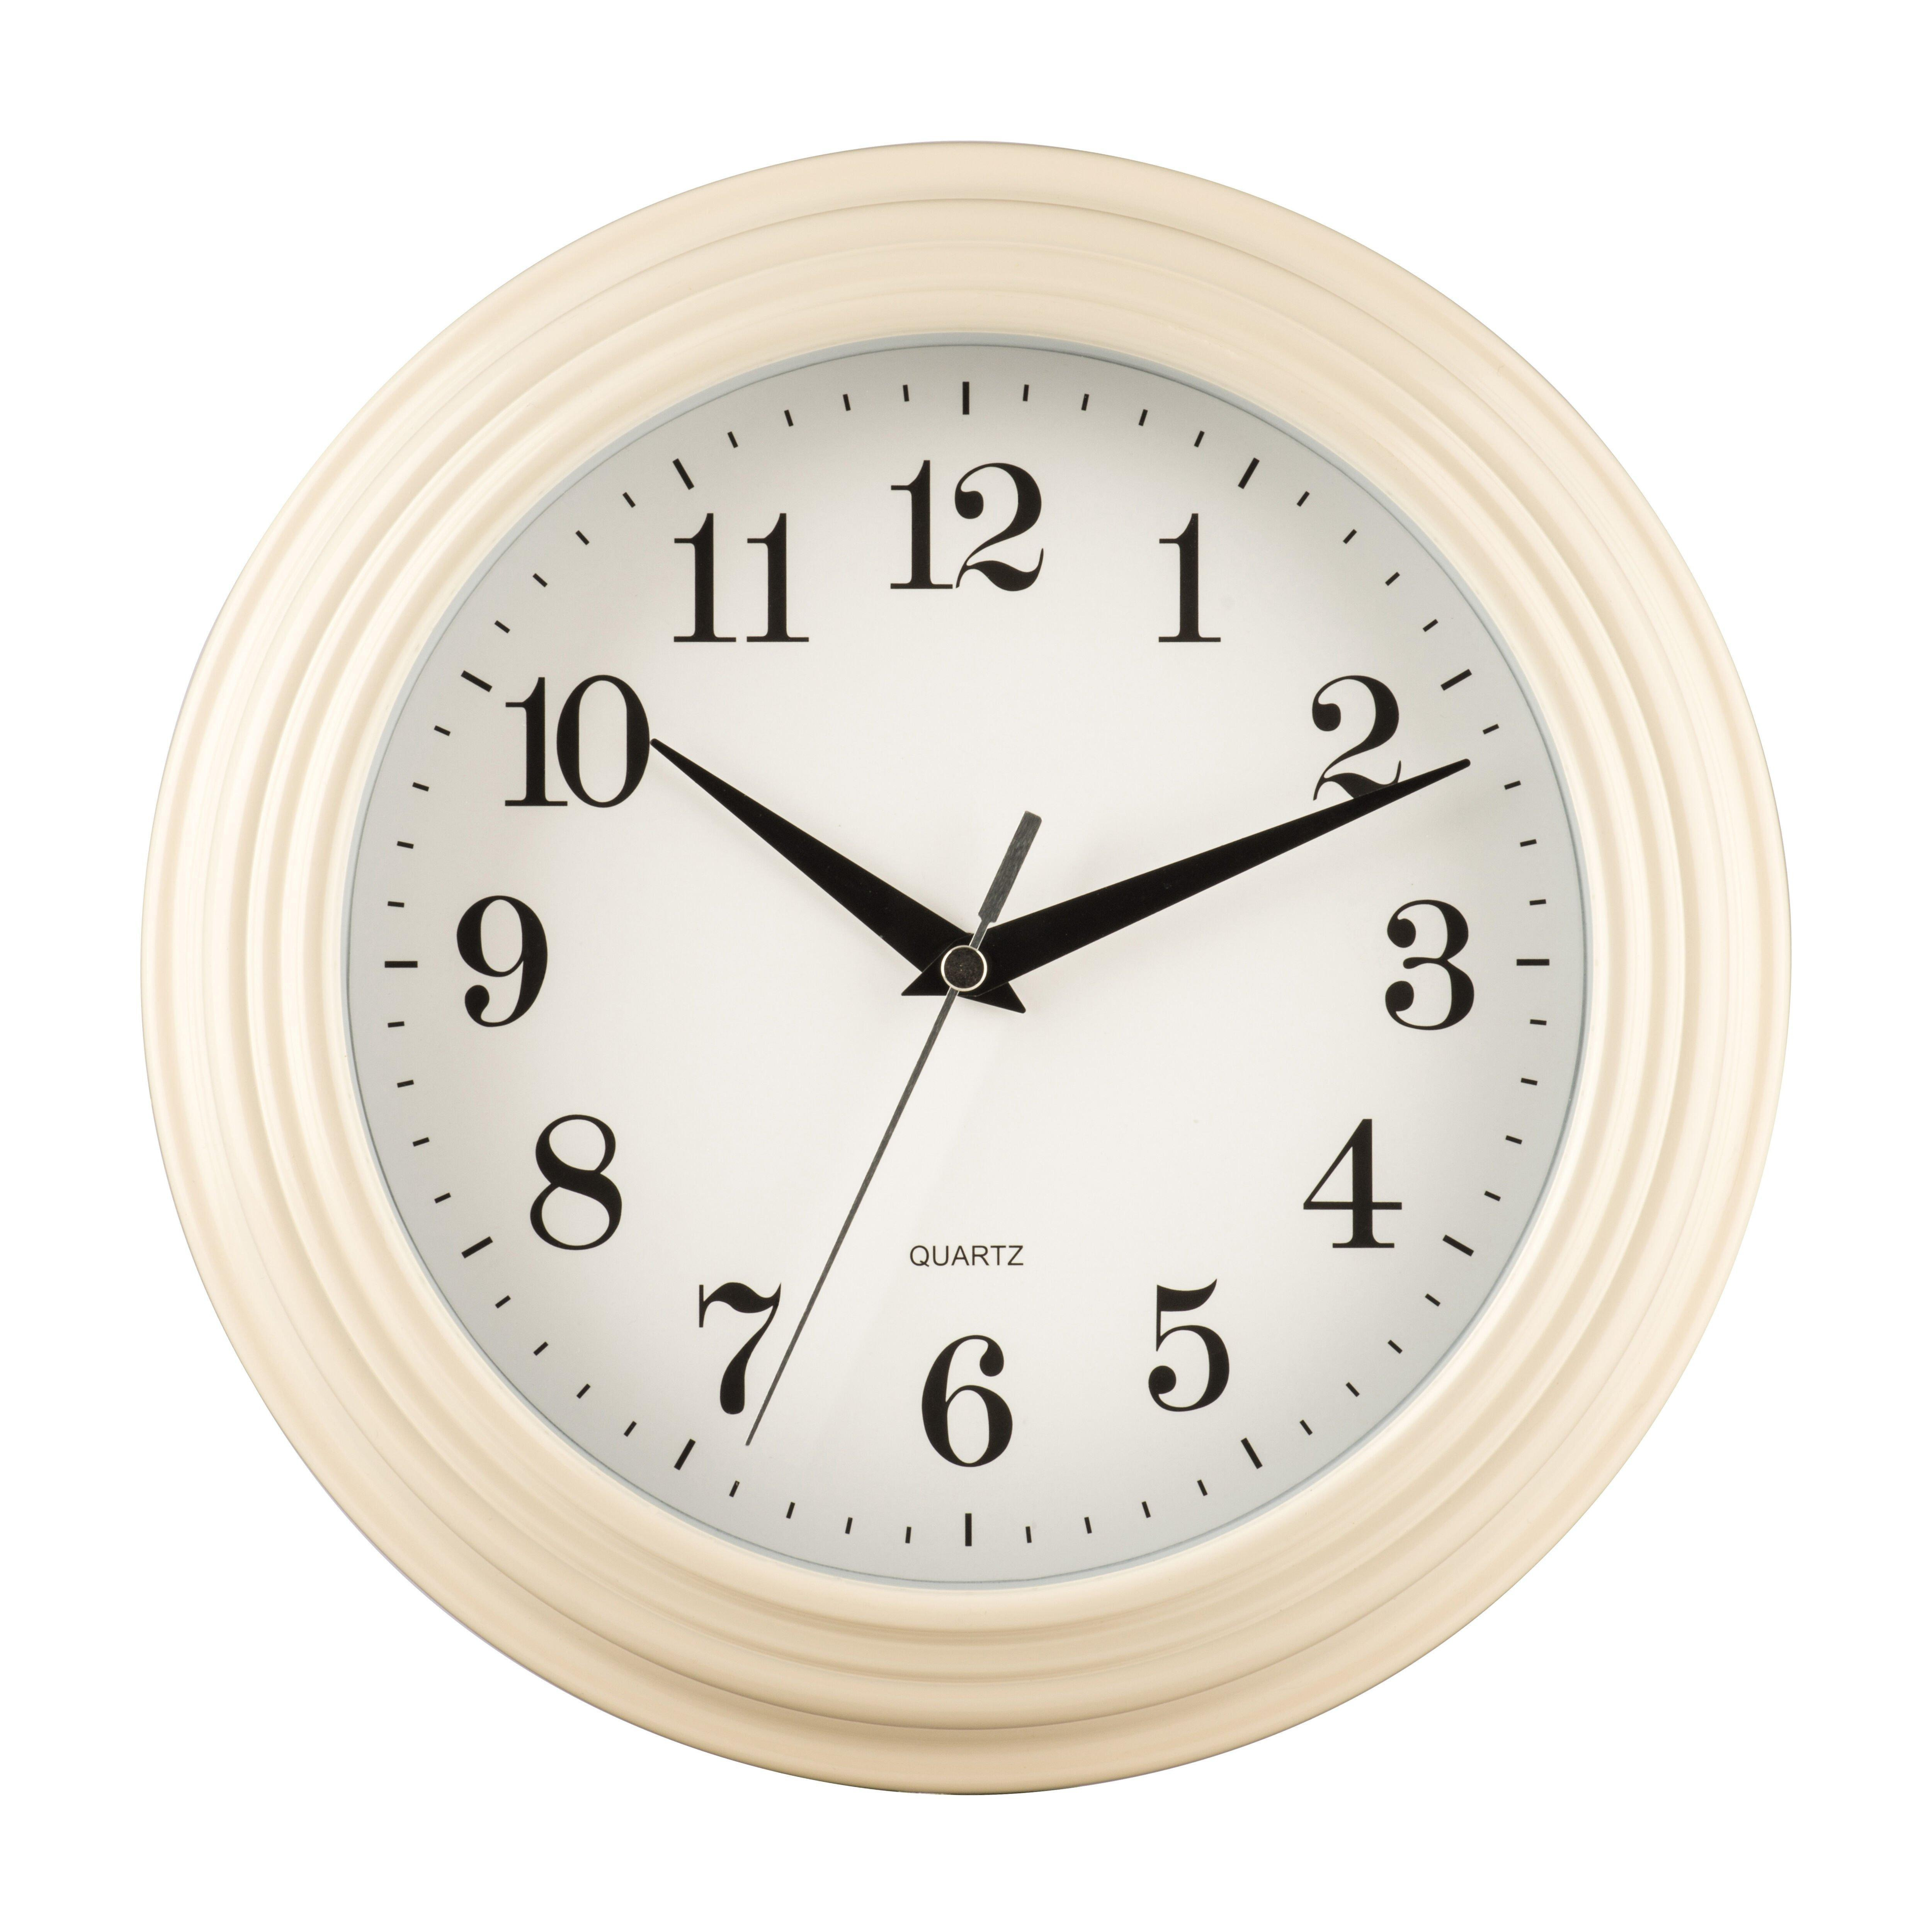 Maison by Premier Vintage Wall Clock - image 1